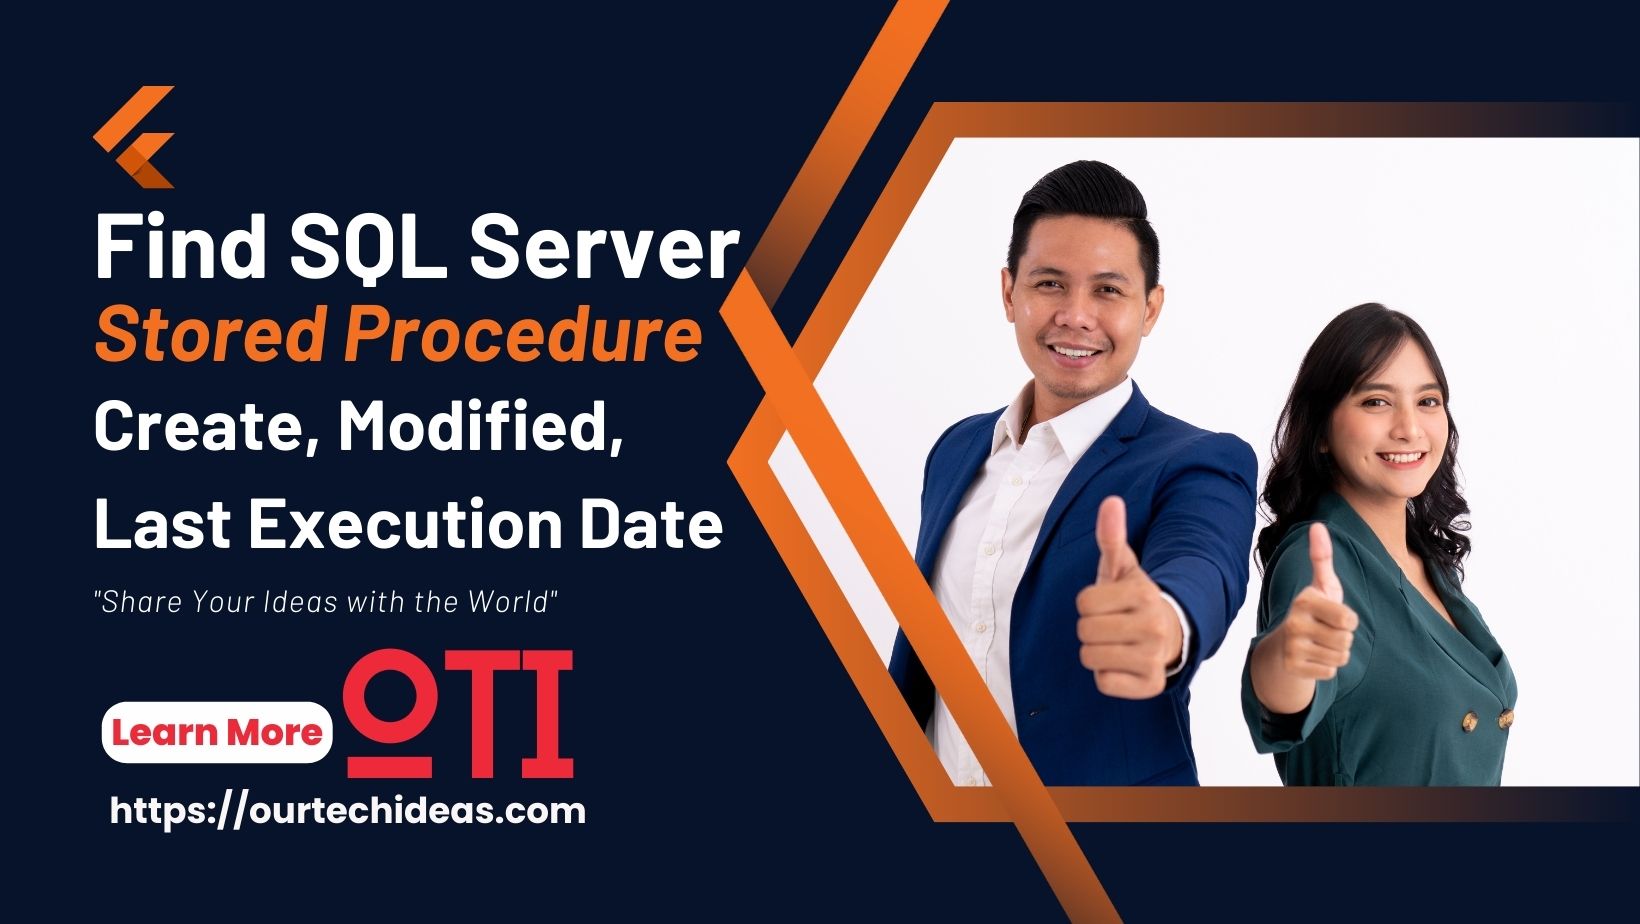 Find SQL Server Stored Procedure Create, Modified, Last Execution Date